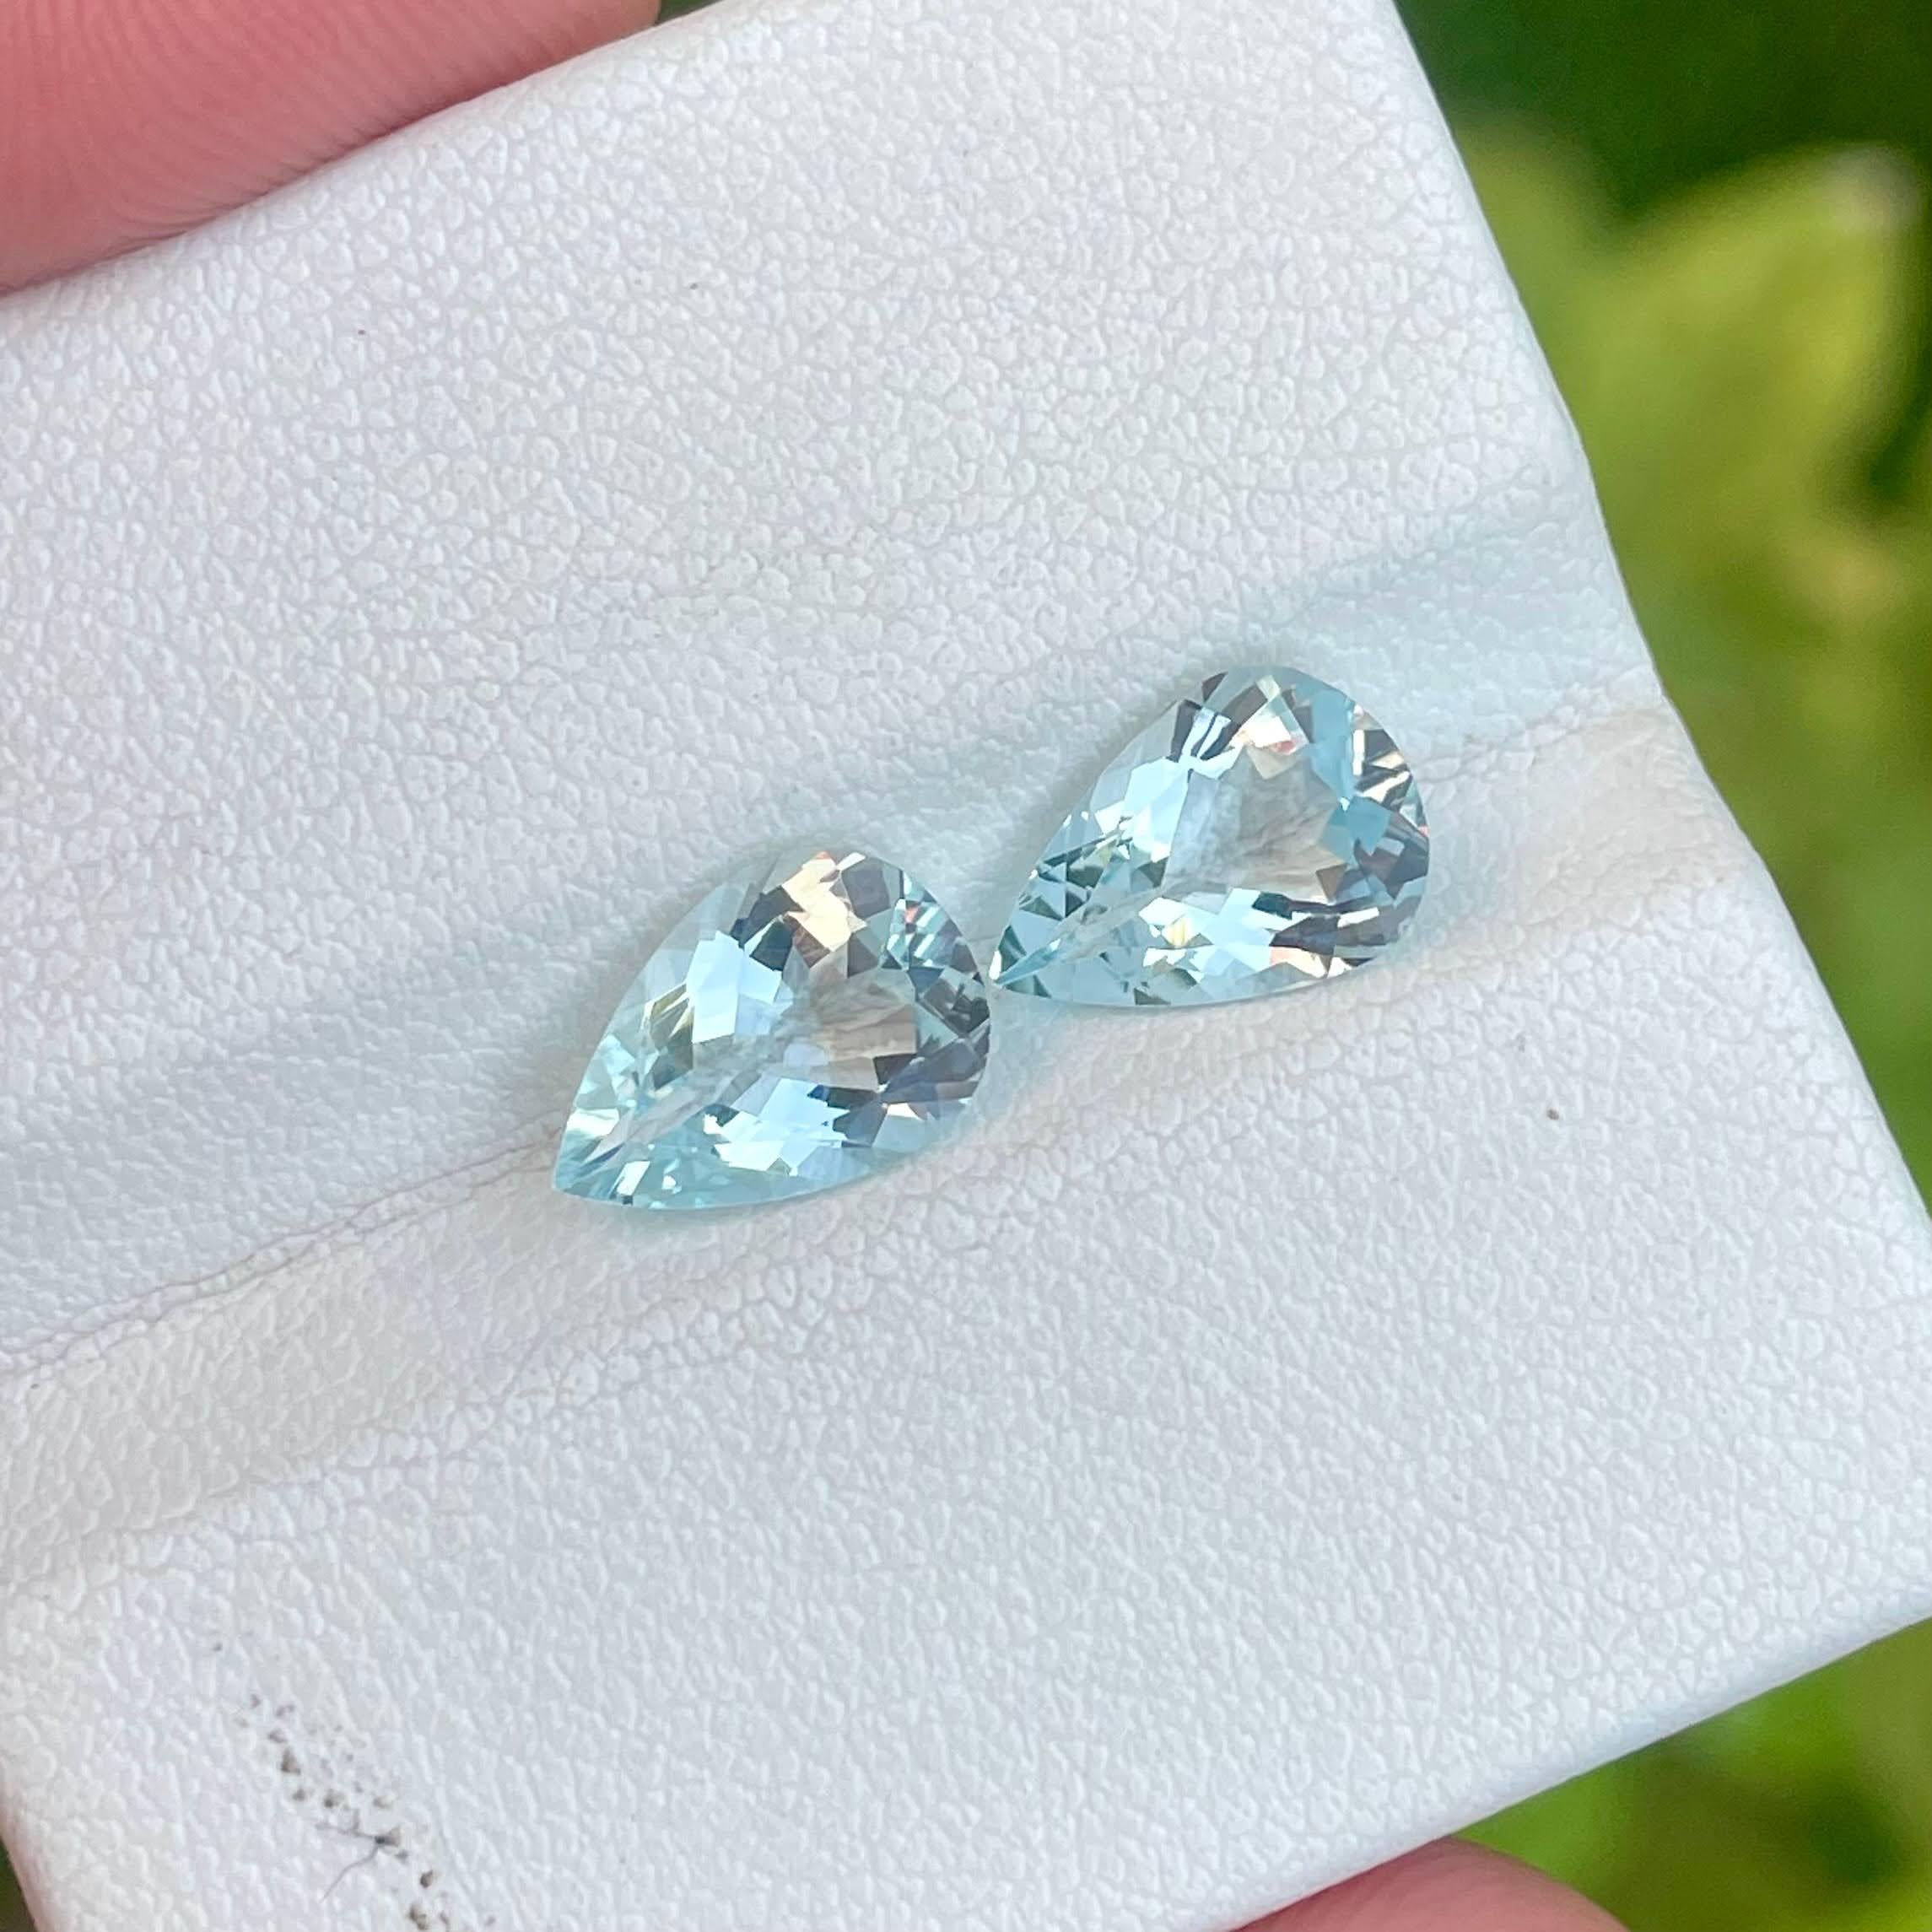 Weight 2.65 carats 
Dimensions 10.0x7.0x3.8 mm
Treatment none 
Origin Nigeria 
Clarity eye clean 
Shape pear 
Cut Pear 




Crafted from the finest Nigerian gemstone mines, this stunning pair of Light Blue Aquamarines each weighs 2.56 carats and